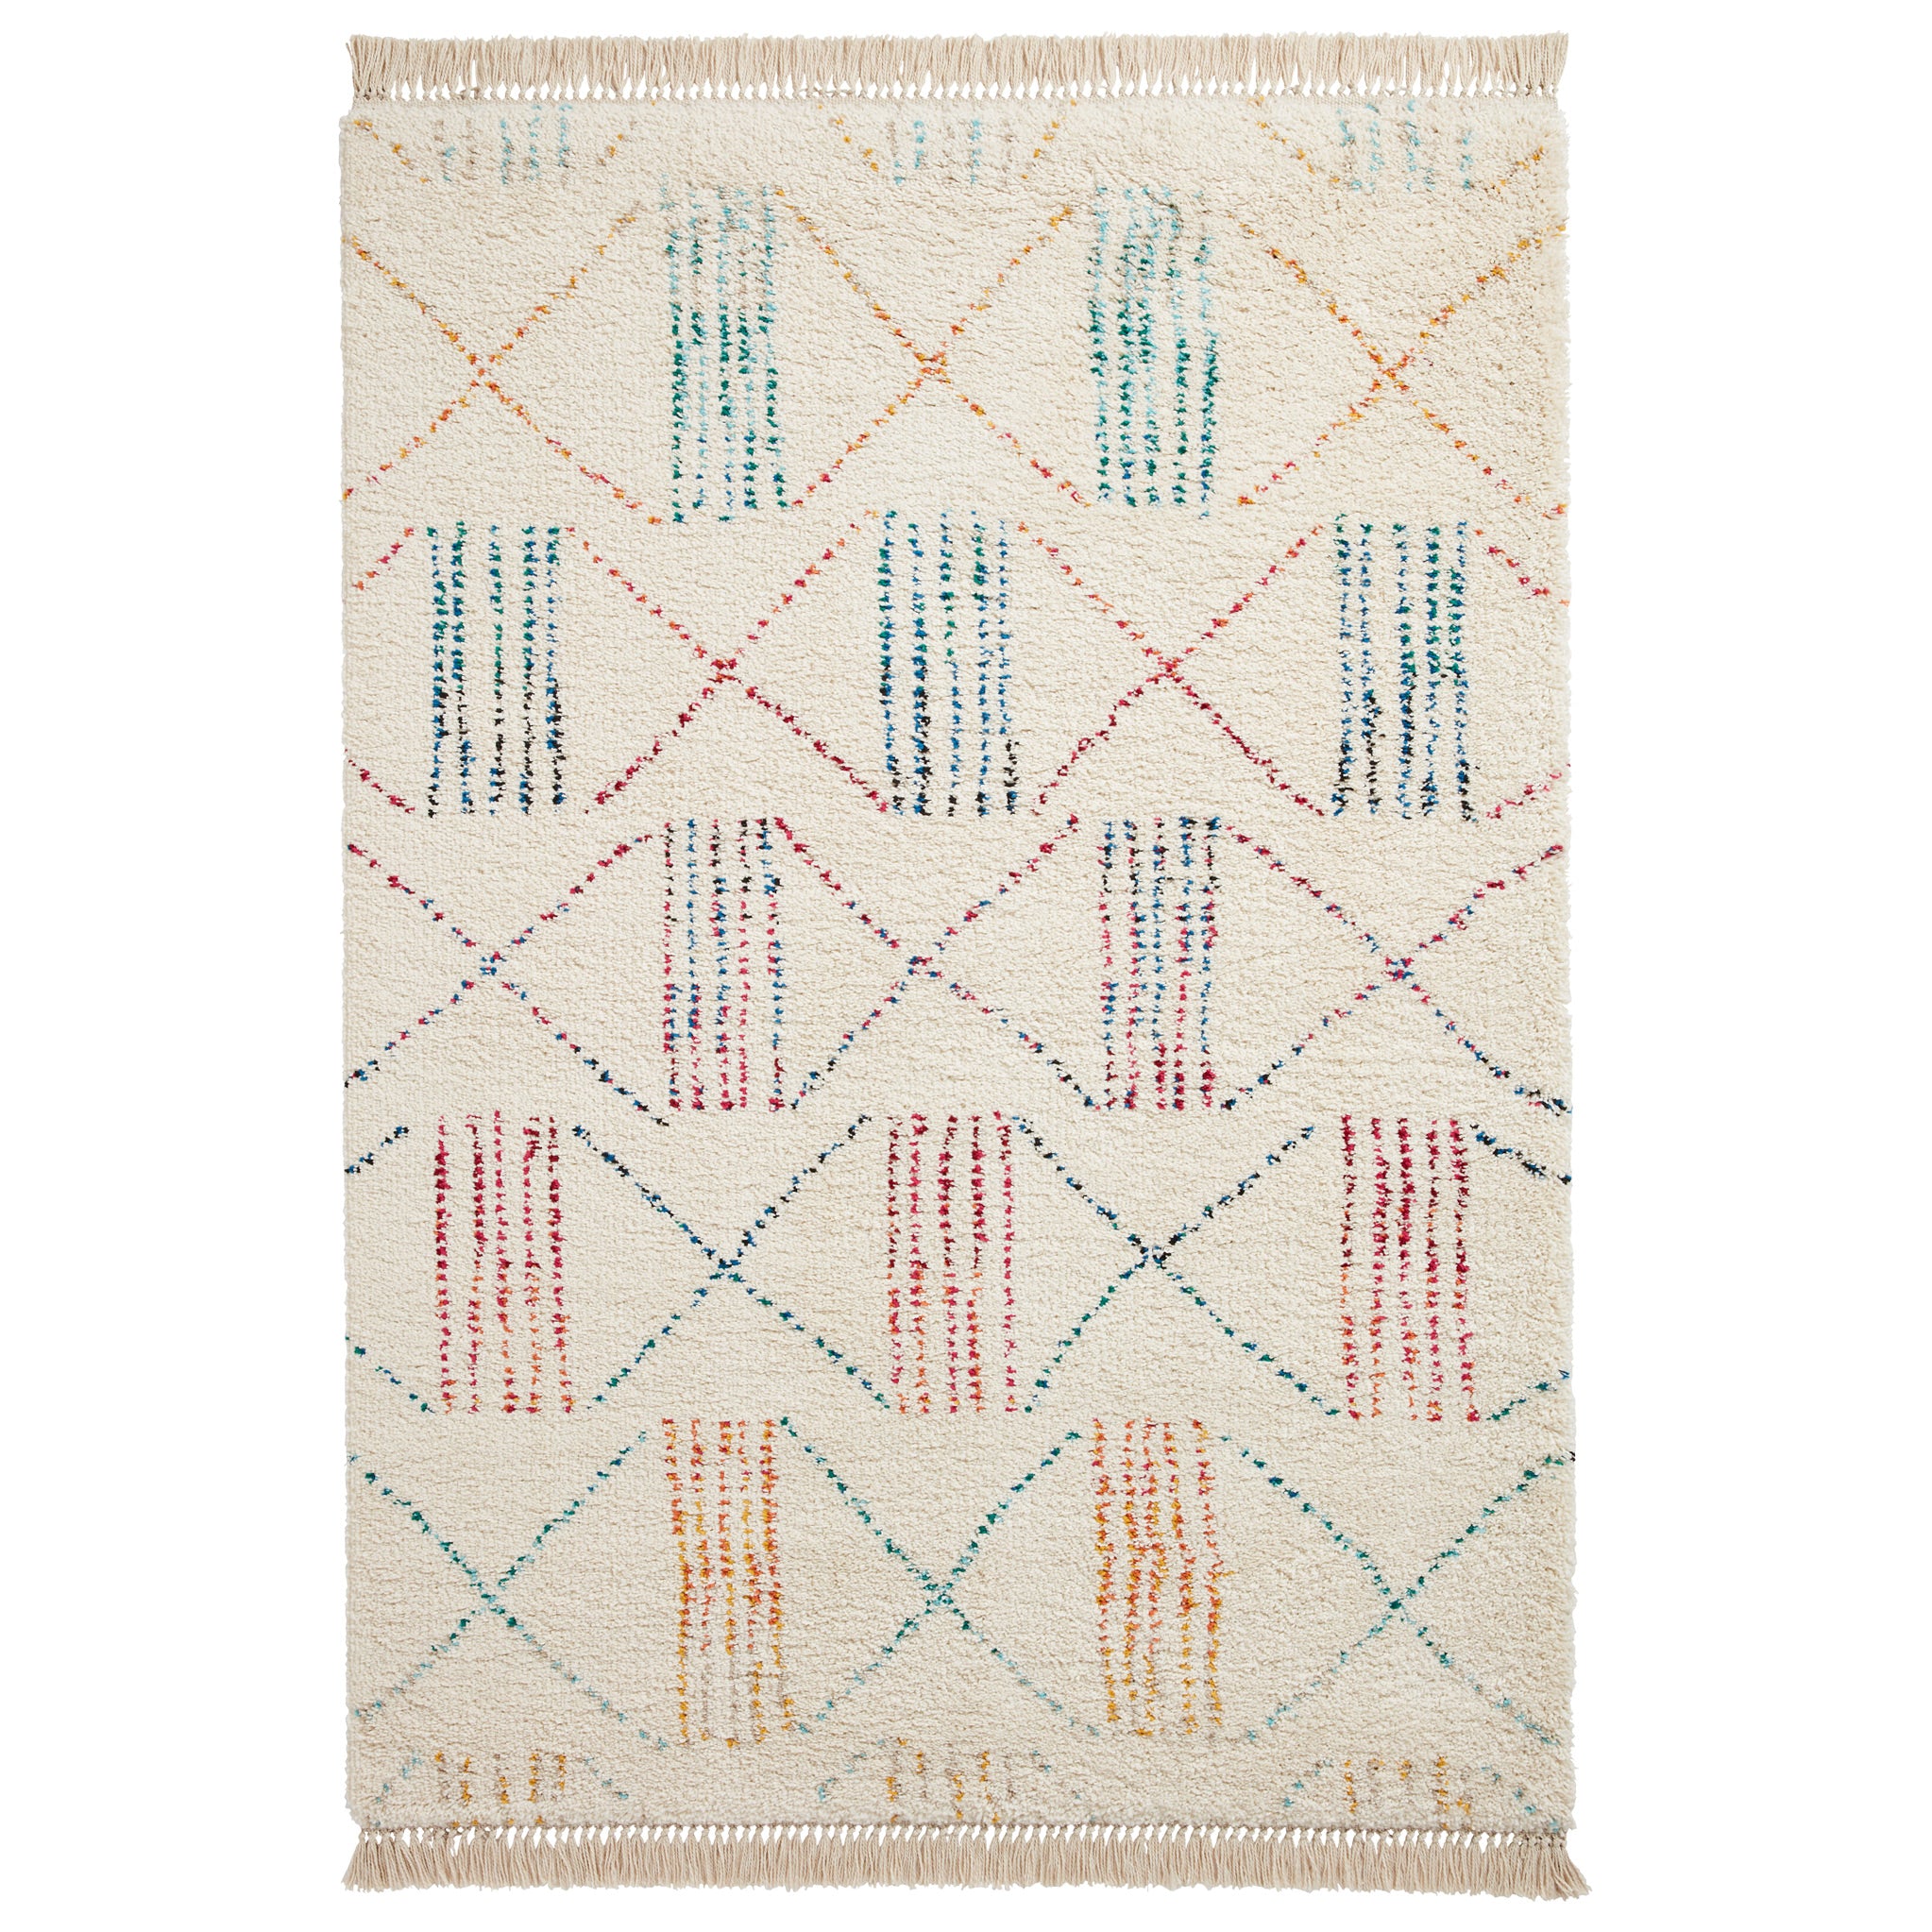 Edie Boho Moroccan Multi Coloured Patterned Shaggy Rectangular Rug For Living Room Or Bedroom